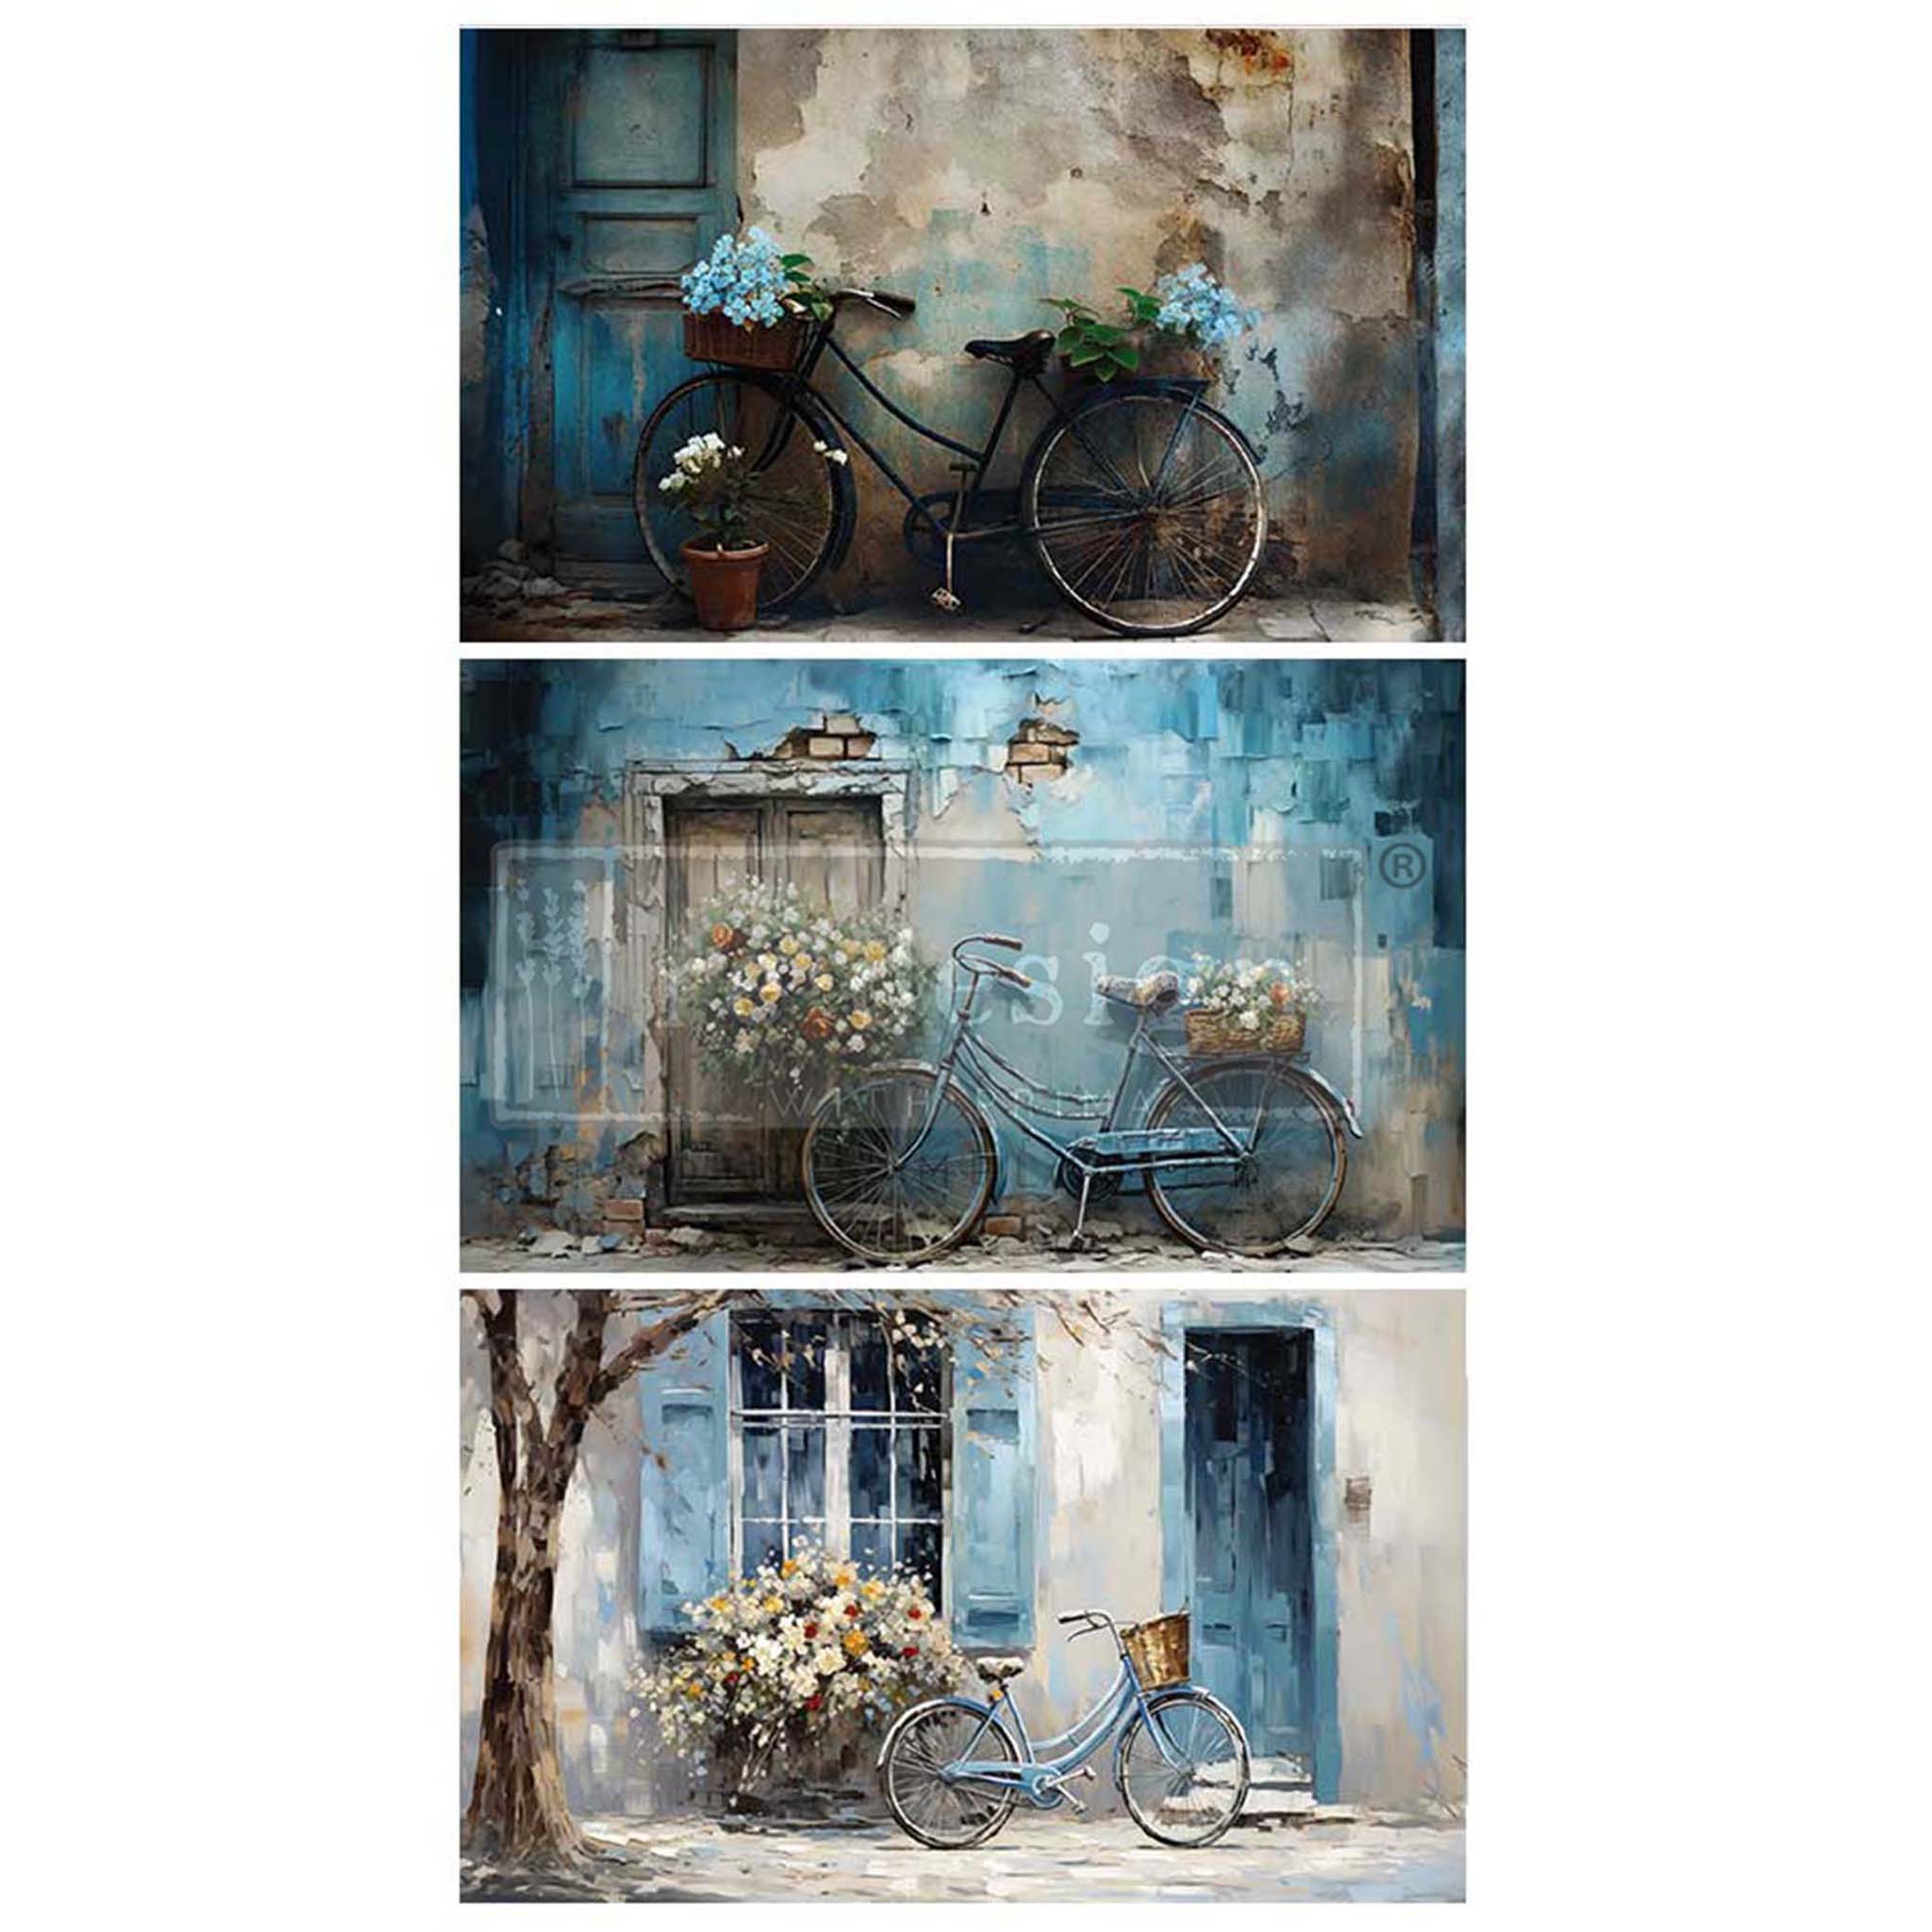 Tissue paper designs that feature 3 charming designs of blue bicycles against romantic home scenes. White borders surround the 3 papers.